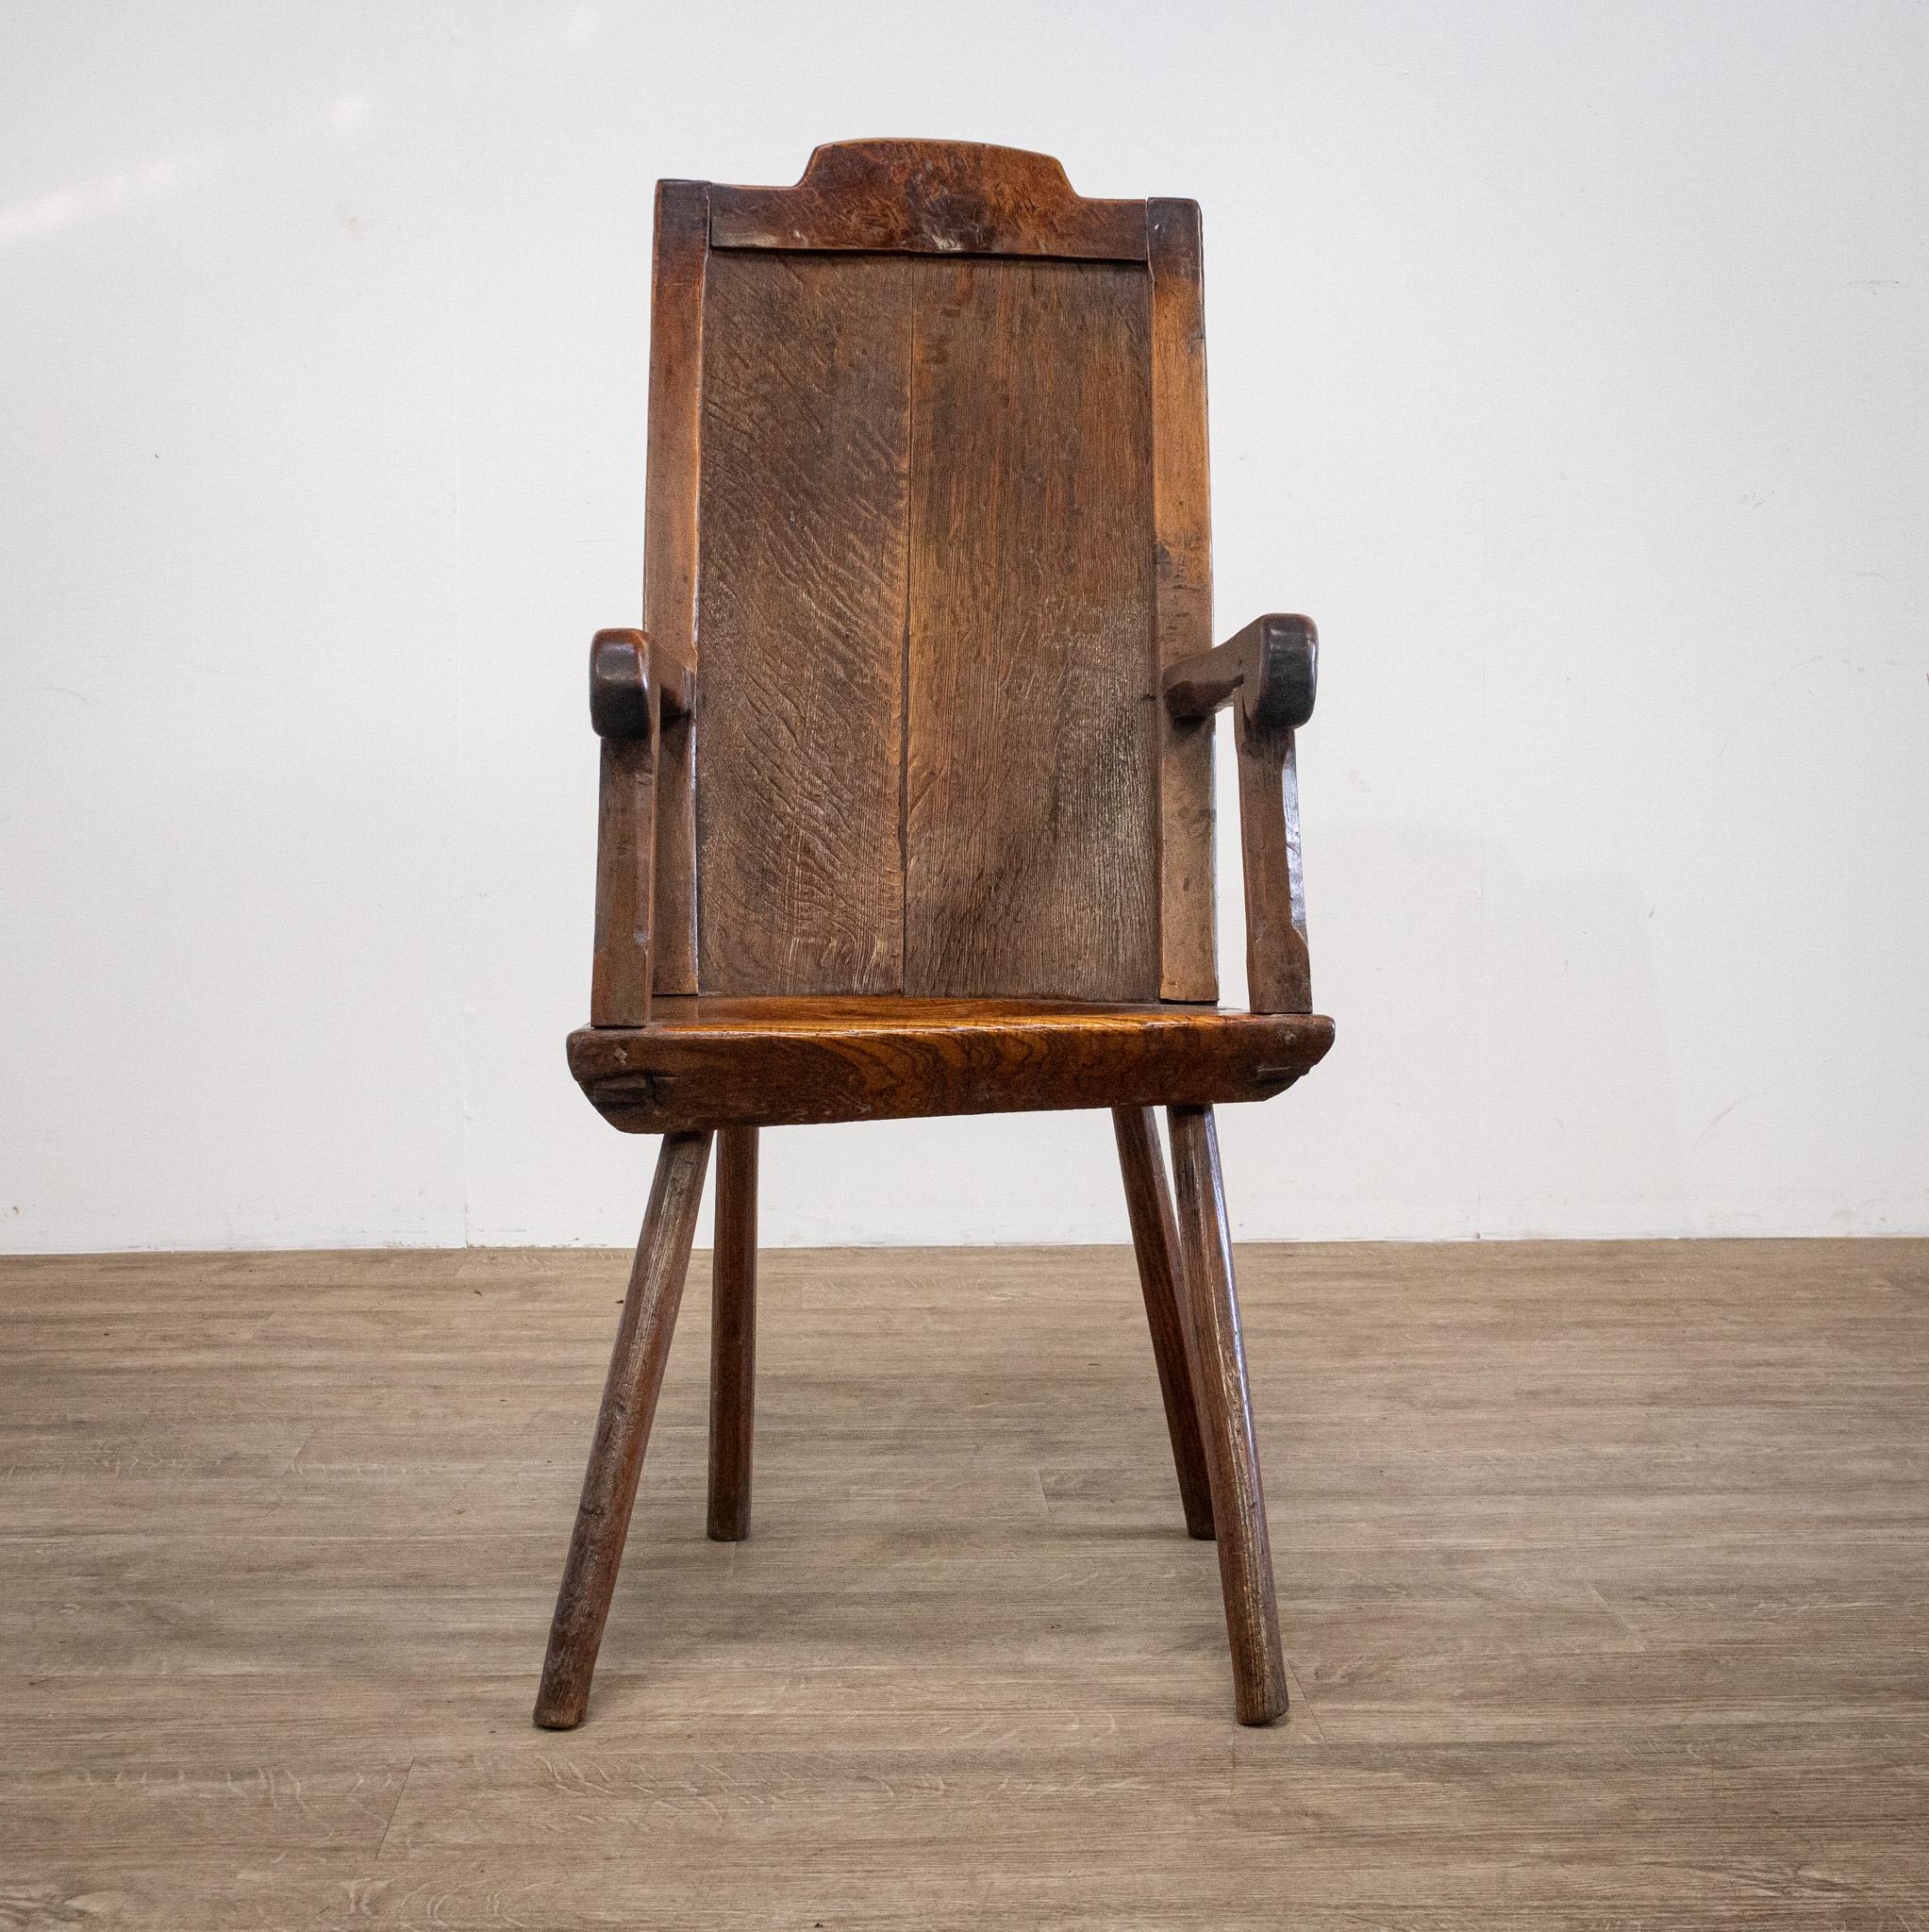 A beautifully simple and rarely available 18th century hand crafted primitive chair, this has a lovely colour and patina to the wood and will make a wonderful statement piece for any room. The seat is made from a thick, solid piece of wood which has